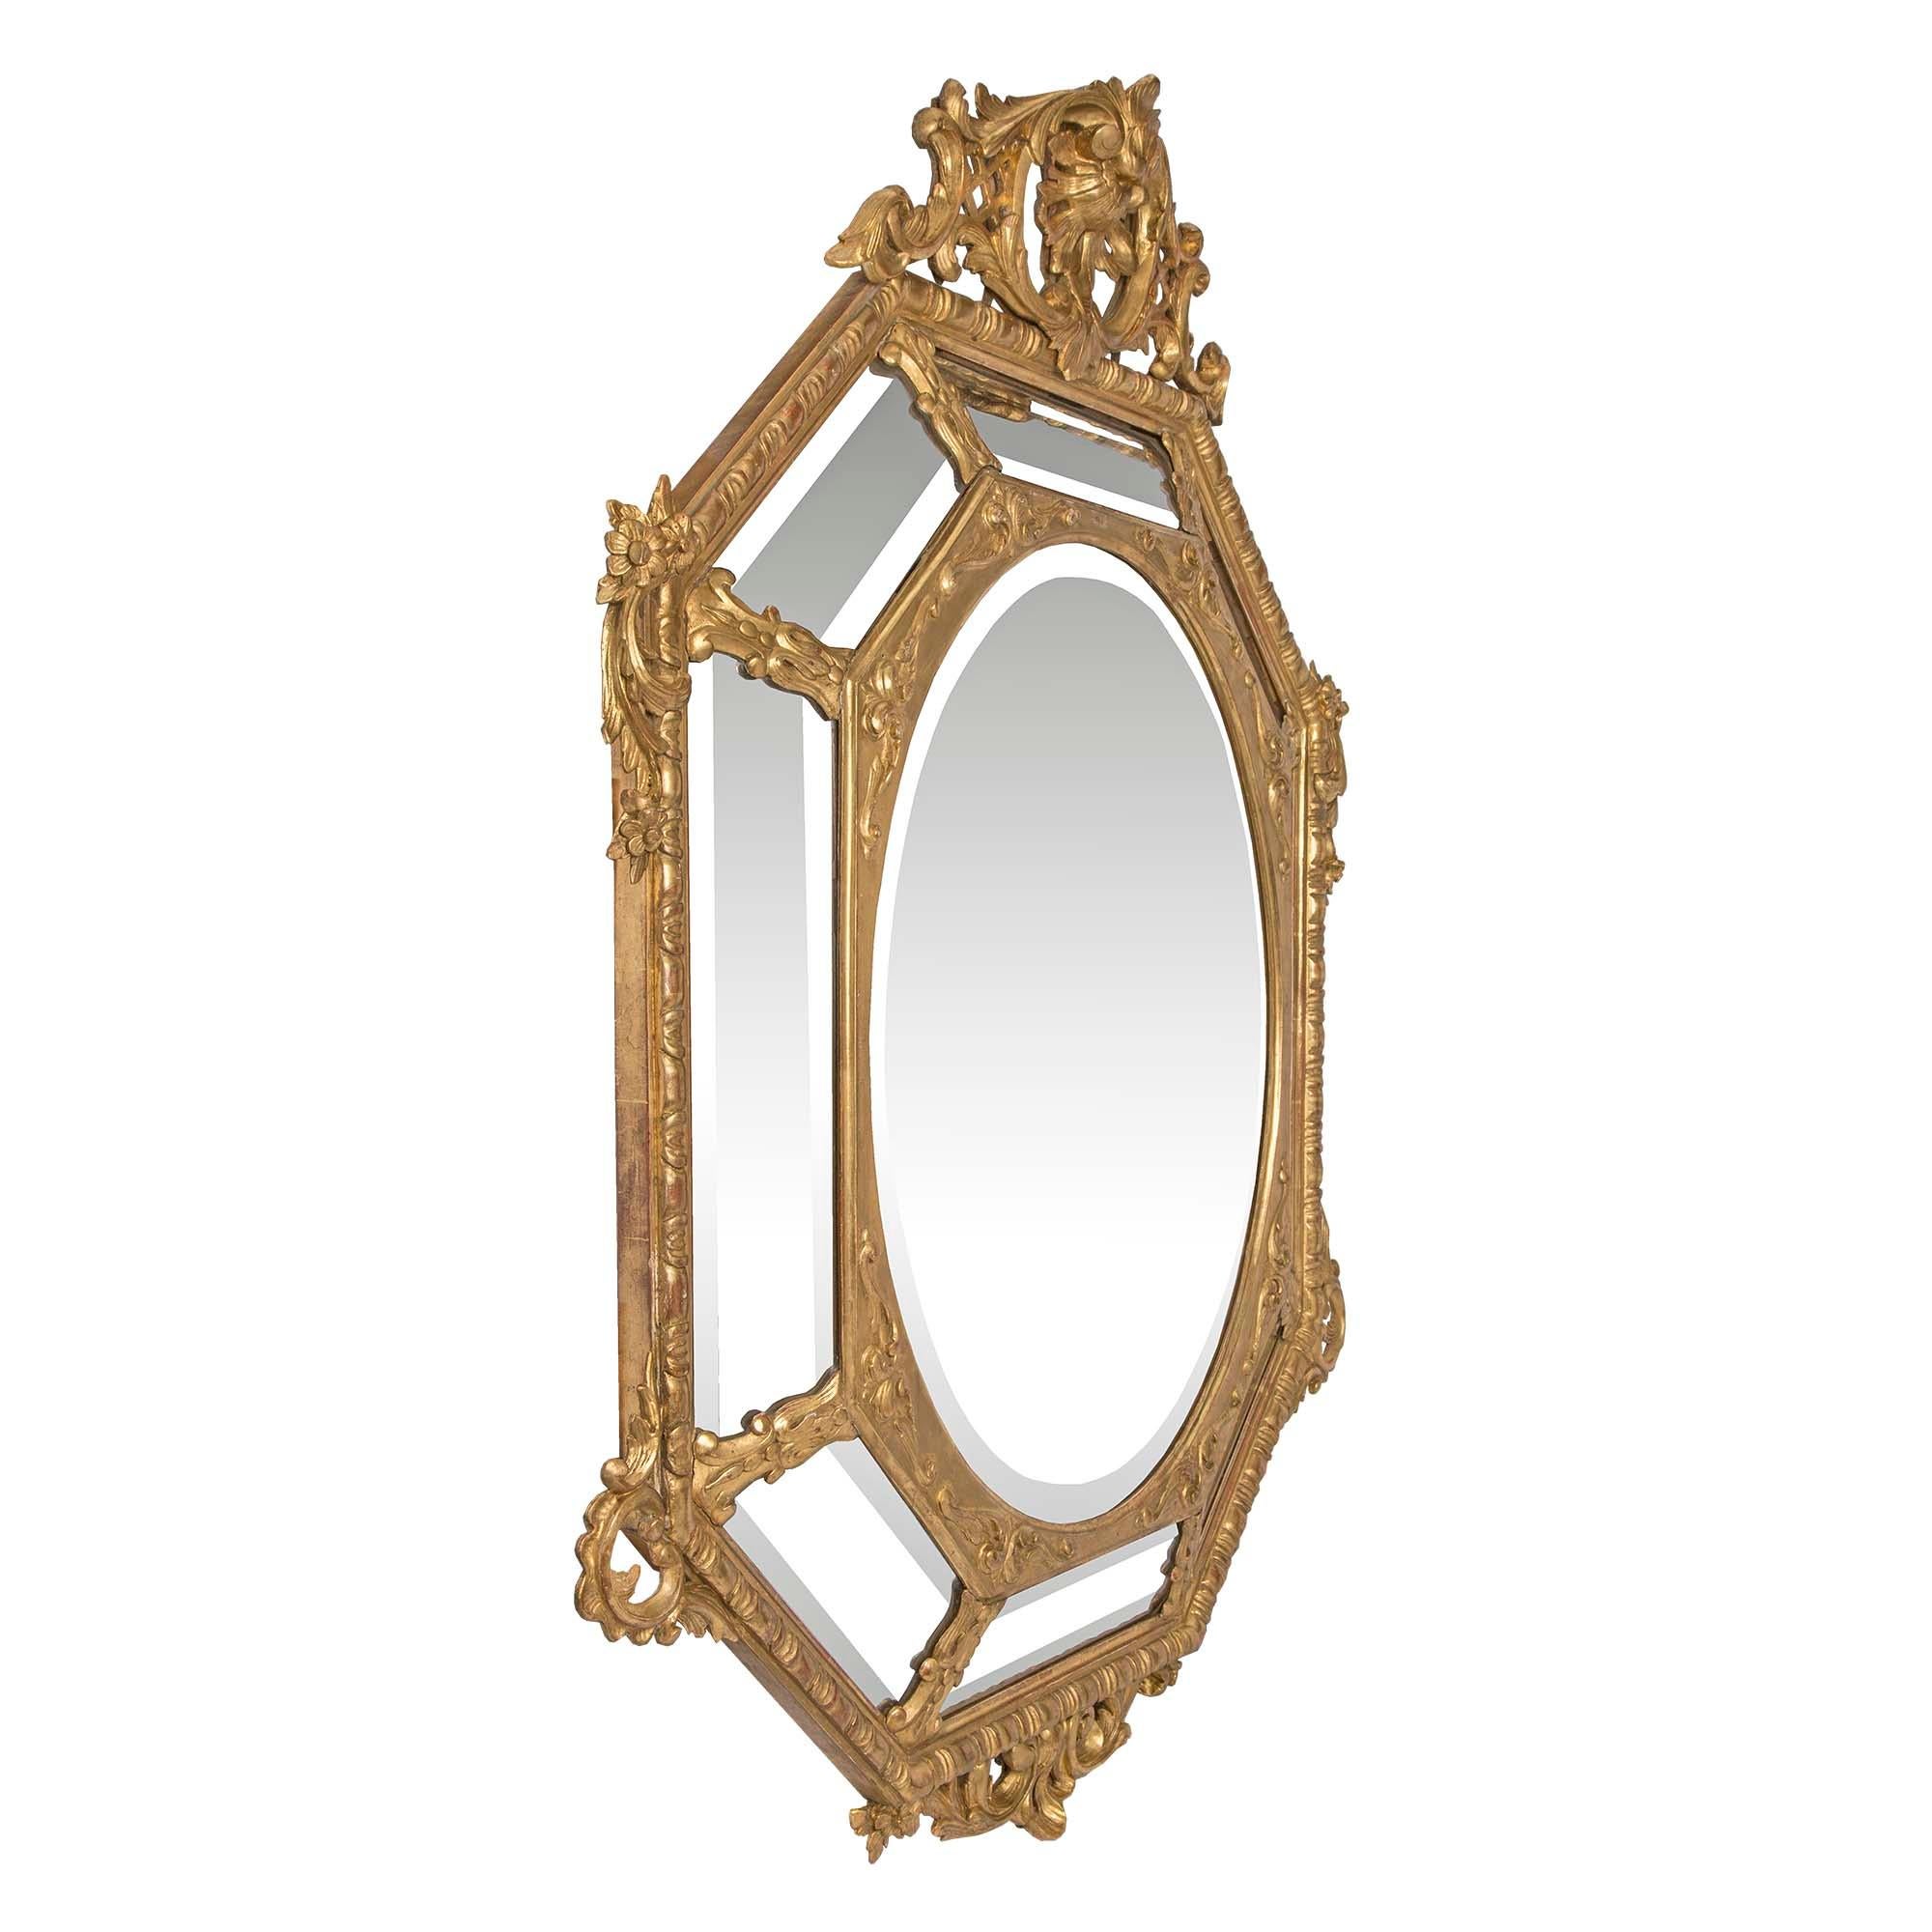 An elegant French early 19th century Louis XVI st. double framed octagonal giltwood mirror. The original central oval shaped beveled mirror plate is framed in a decorative giltwood border with finely carved scrolled foliate patterns. The outer